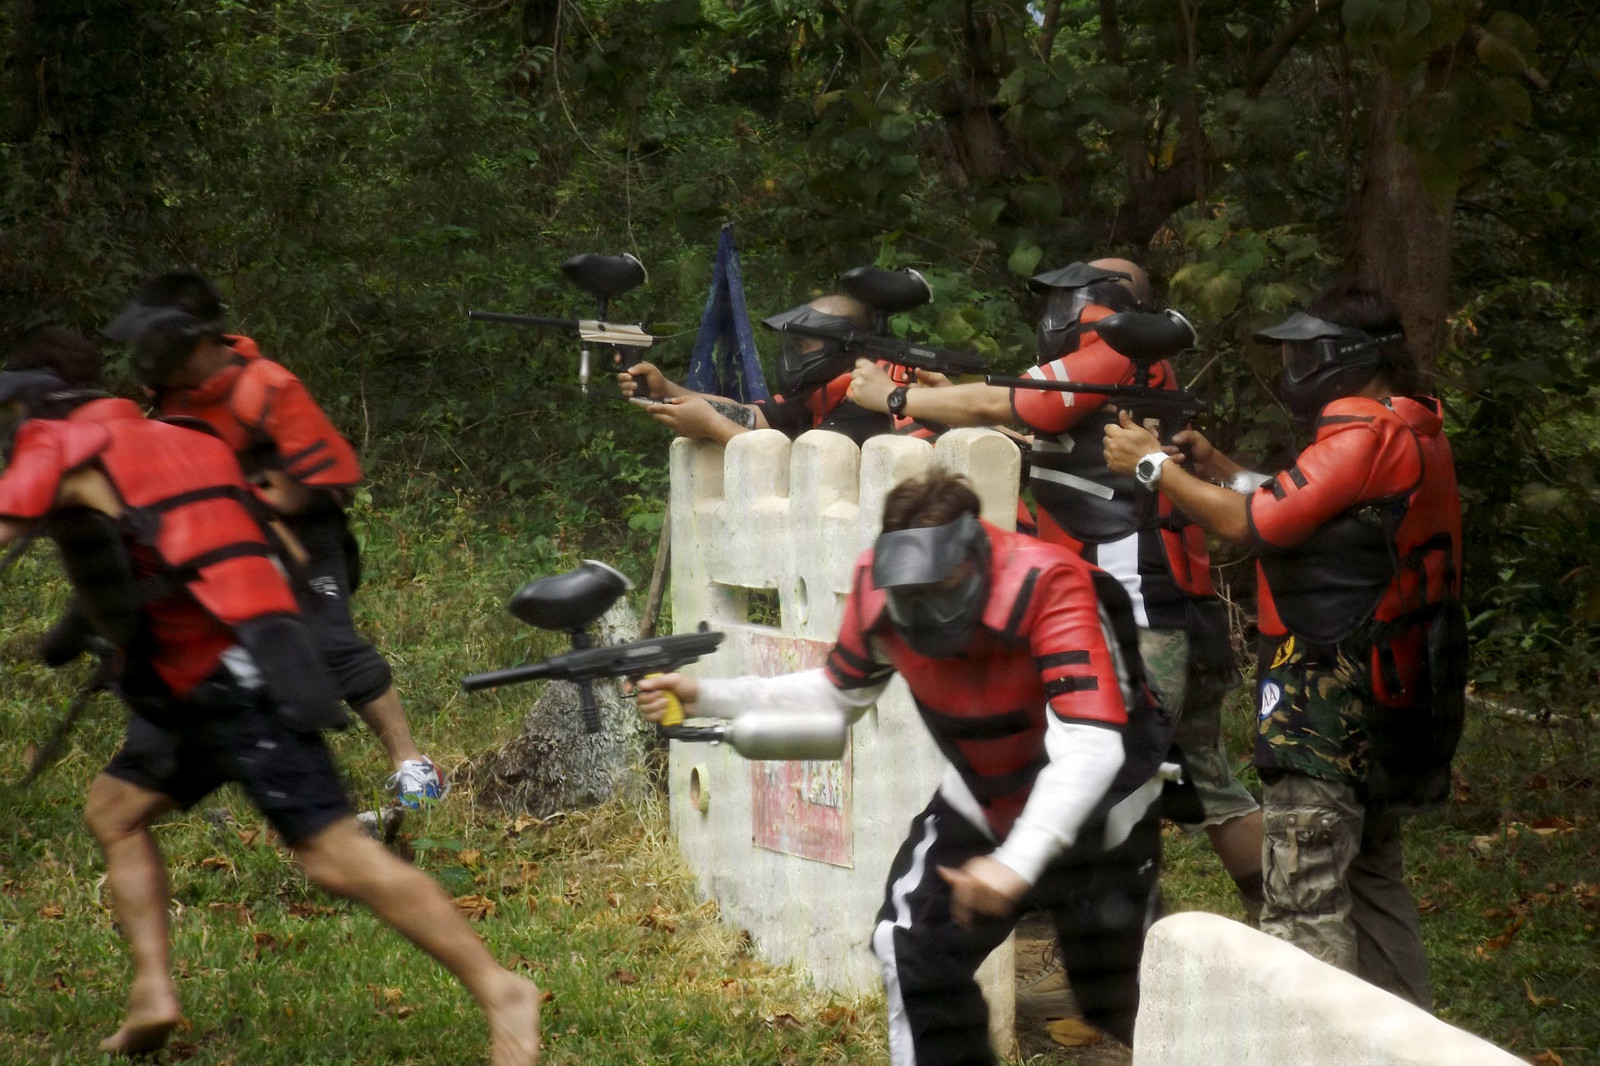 Paintball is a great way to spend a day in Puerto Galera. One of the best activities you can find around Puerto Galera, Oriental Mindoro.